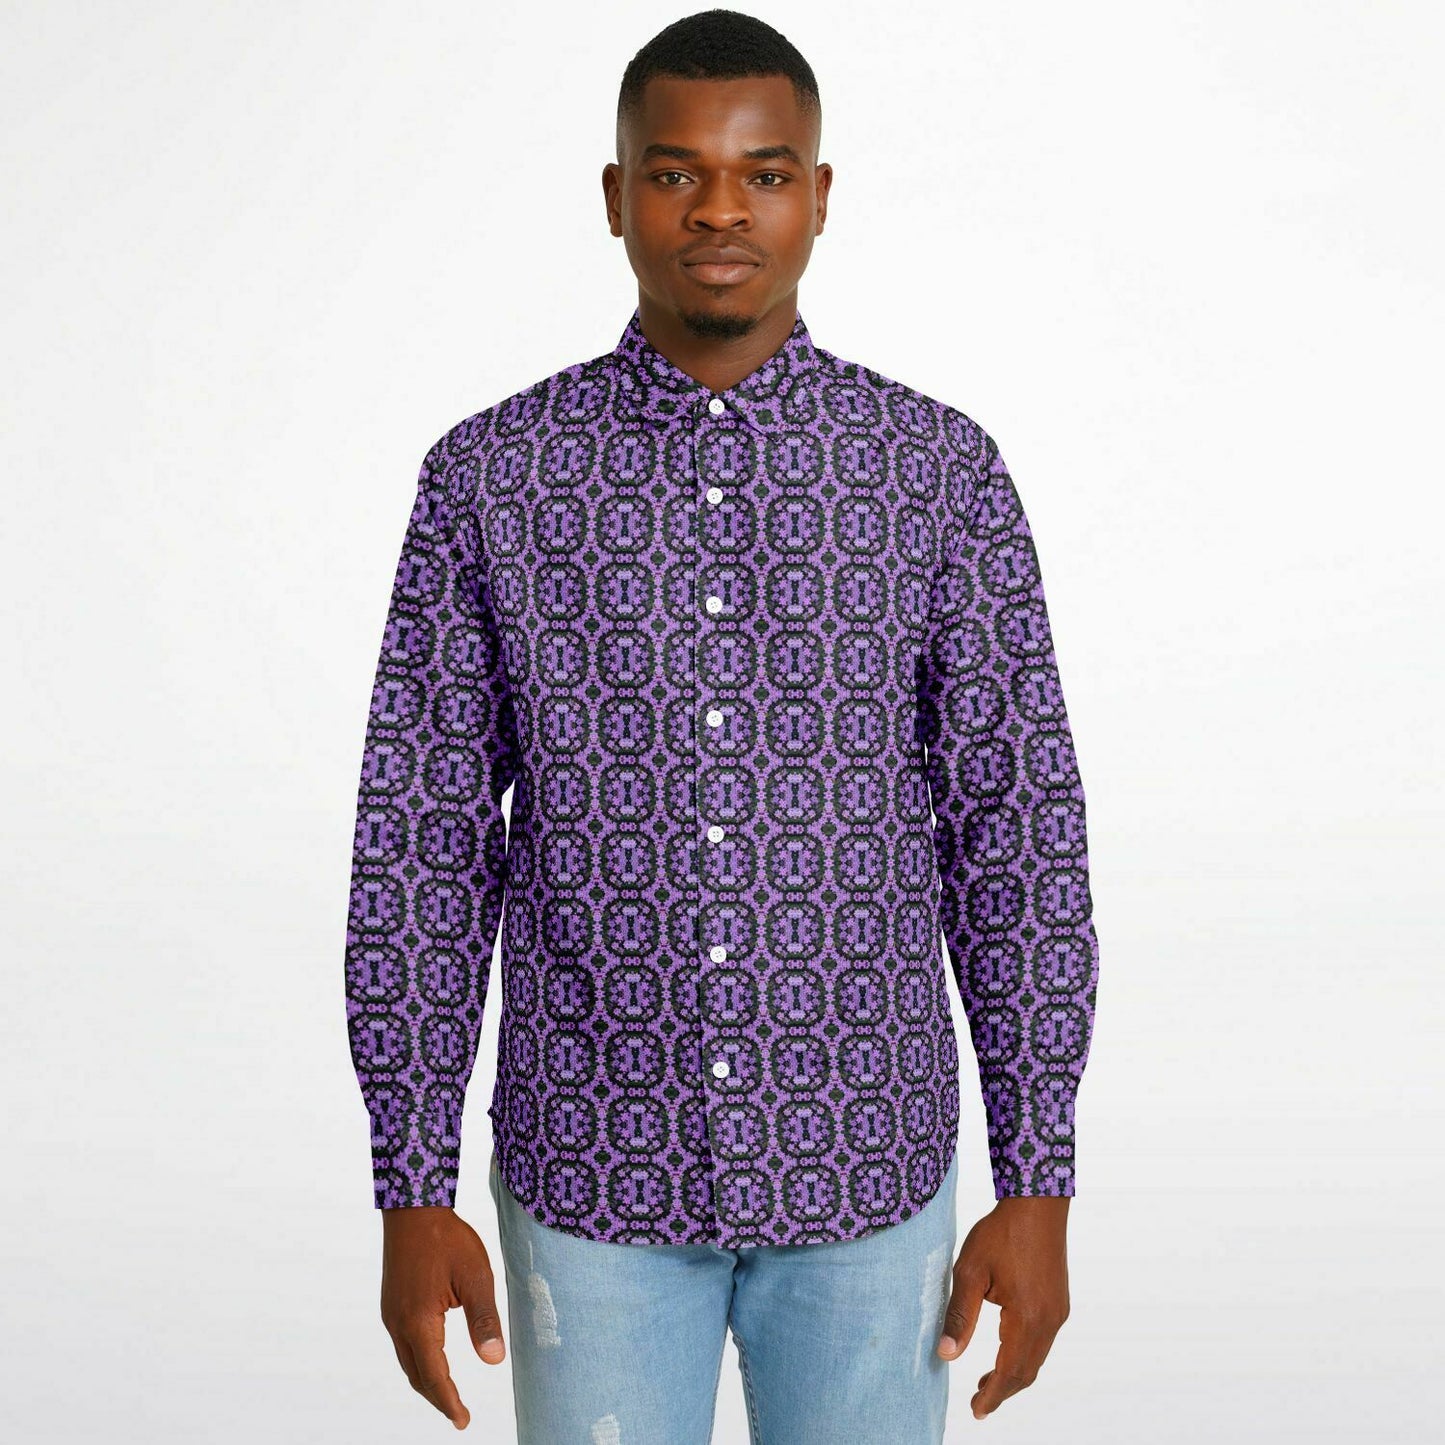 Long Sleeve Button Down Shirt (Violet Rings)